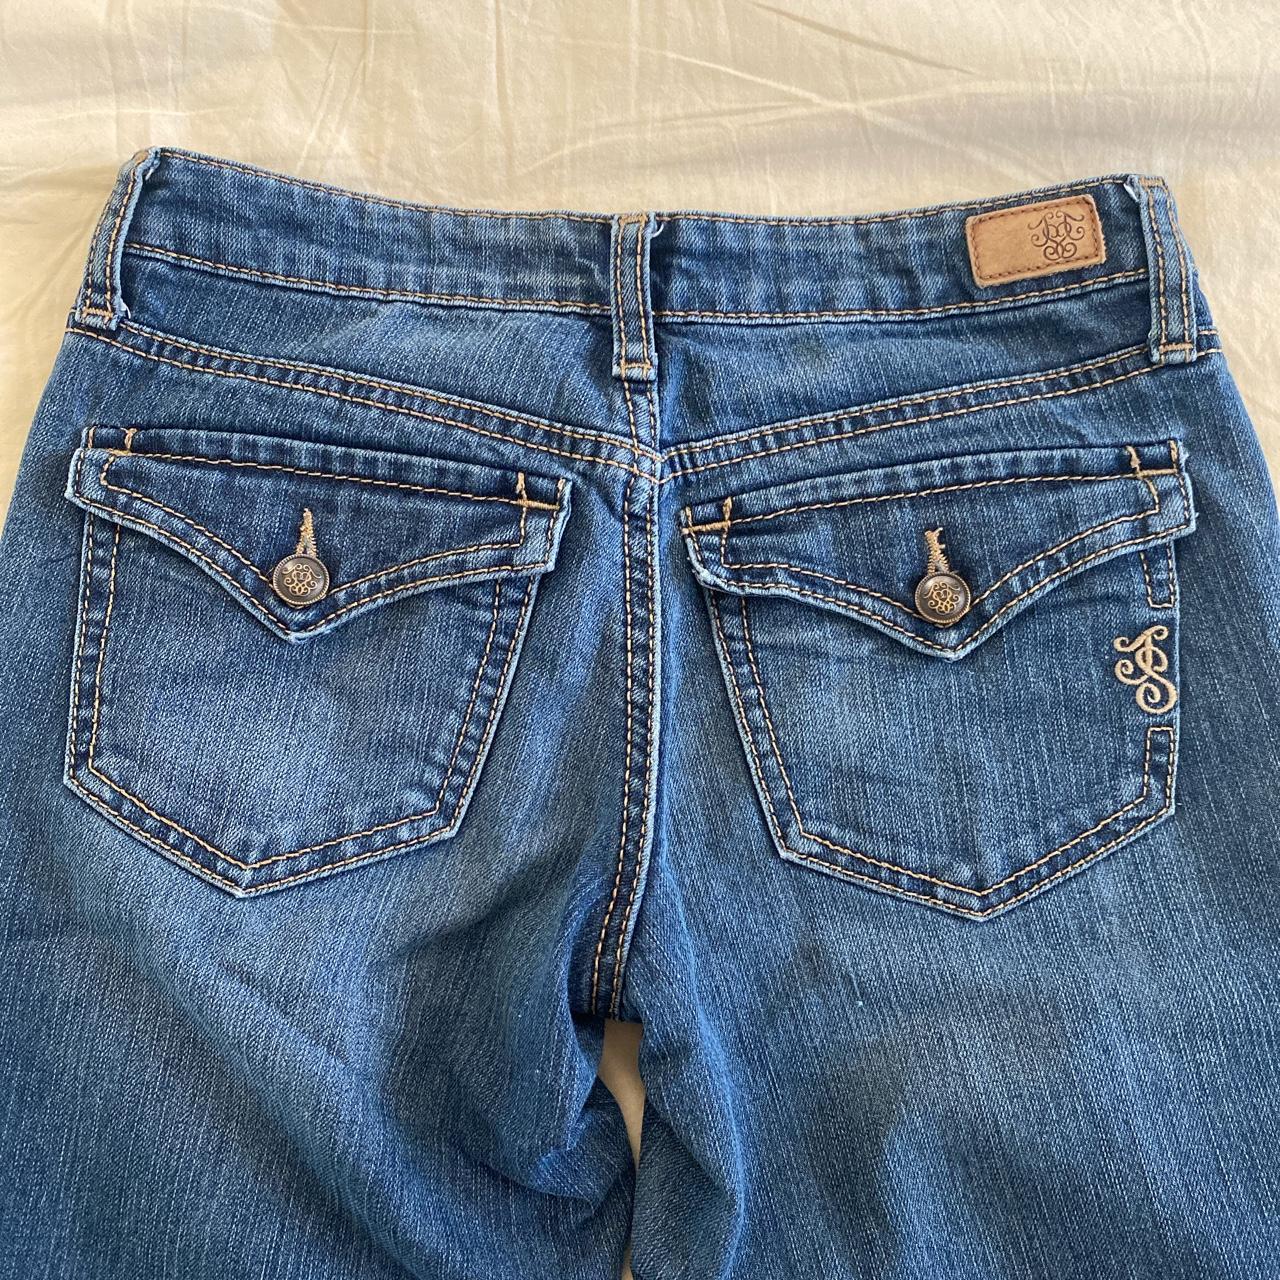 jessica simpson low rise flare jeans love these sm... - Depop